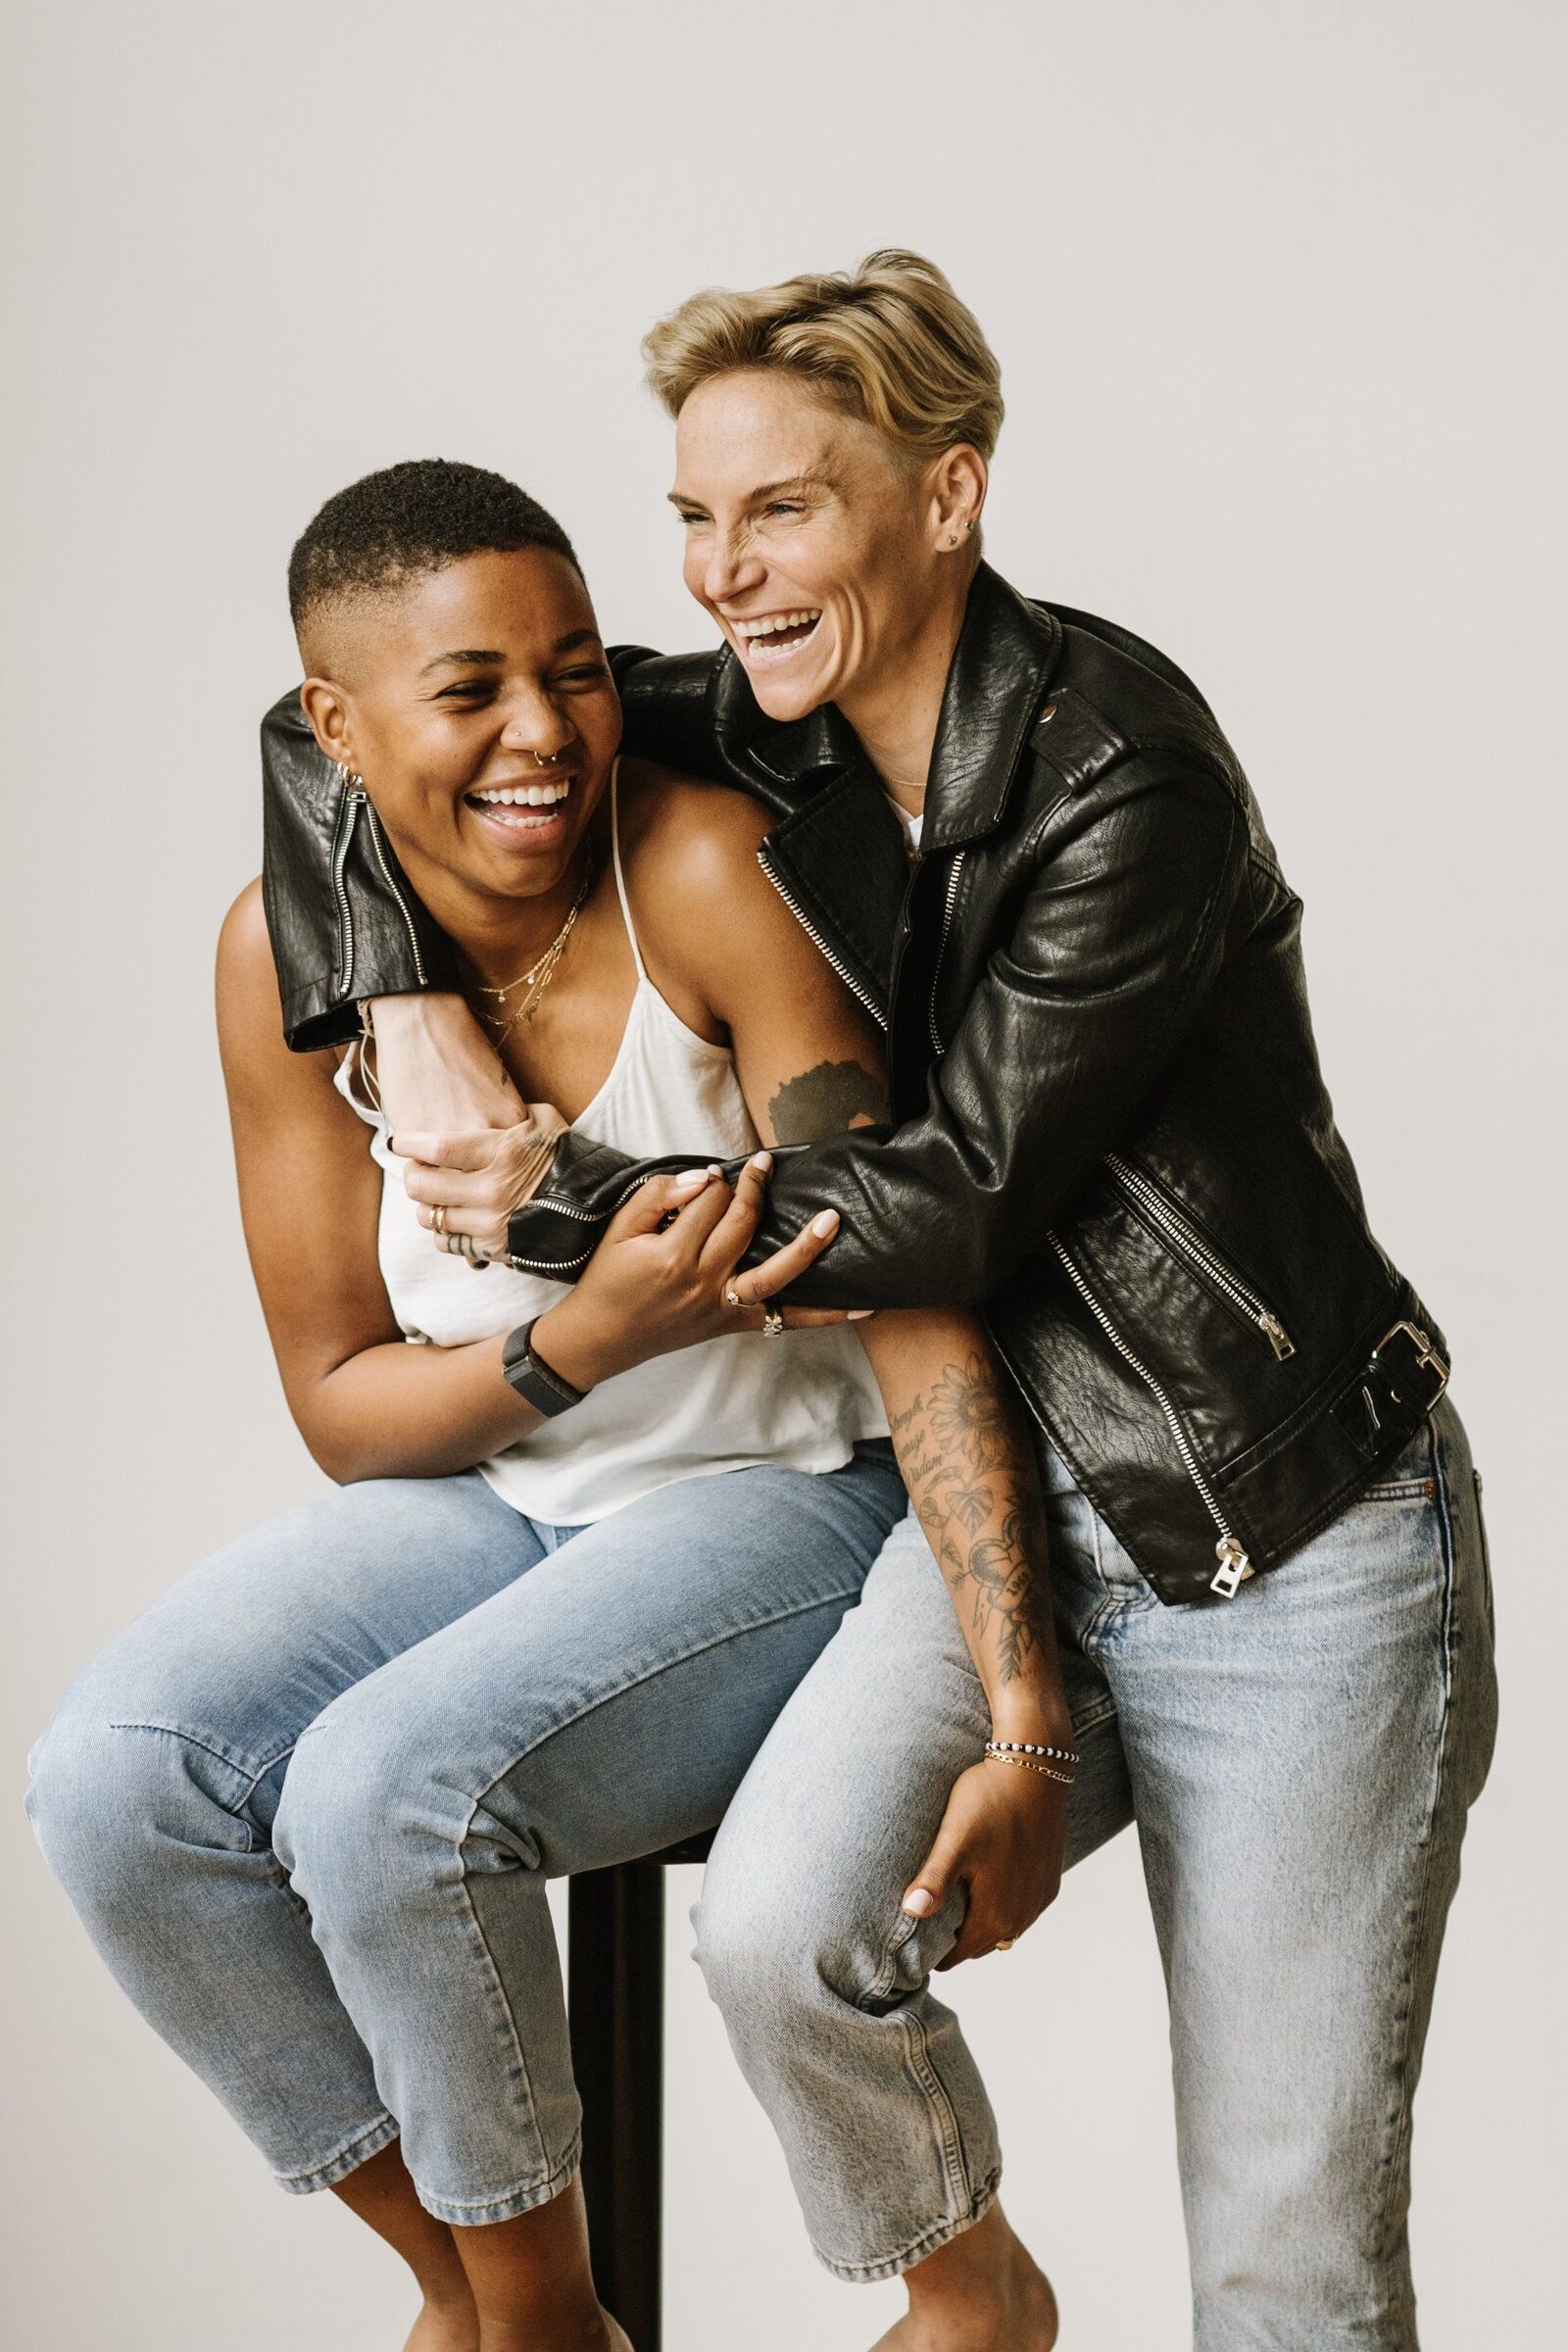 OL Reigns Jess Fishlock, Tziarra King use visibility as couple to stand up for LGBTQ+ community The Seattle Times